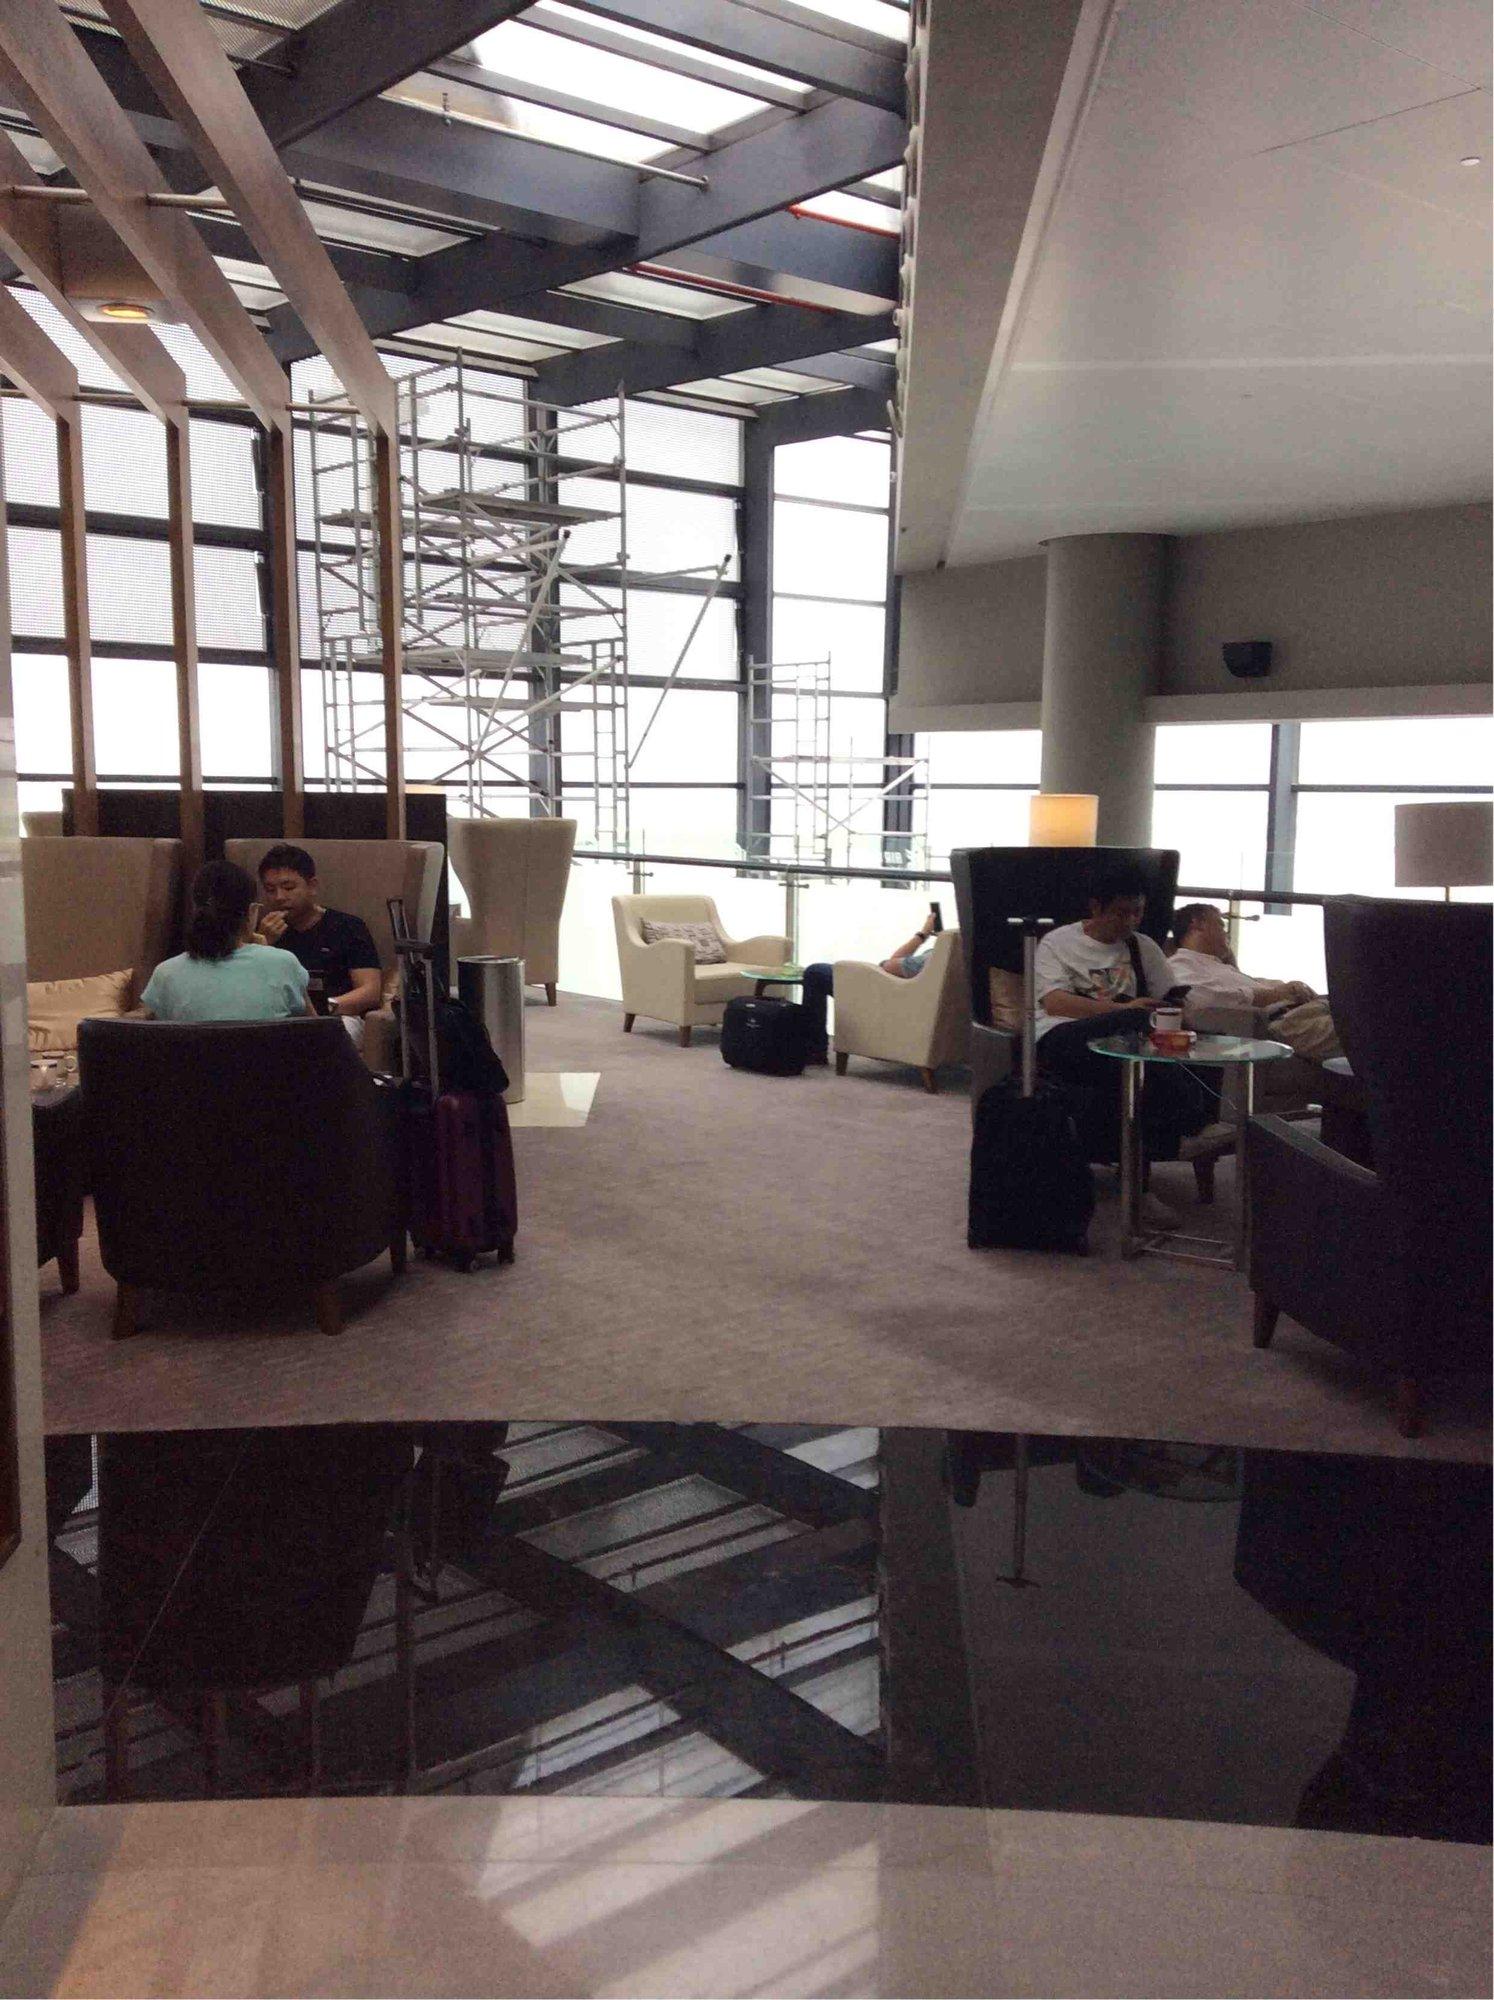 V8 Air China First & Business Class Lounge image 1 of 9